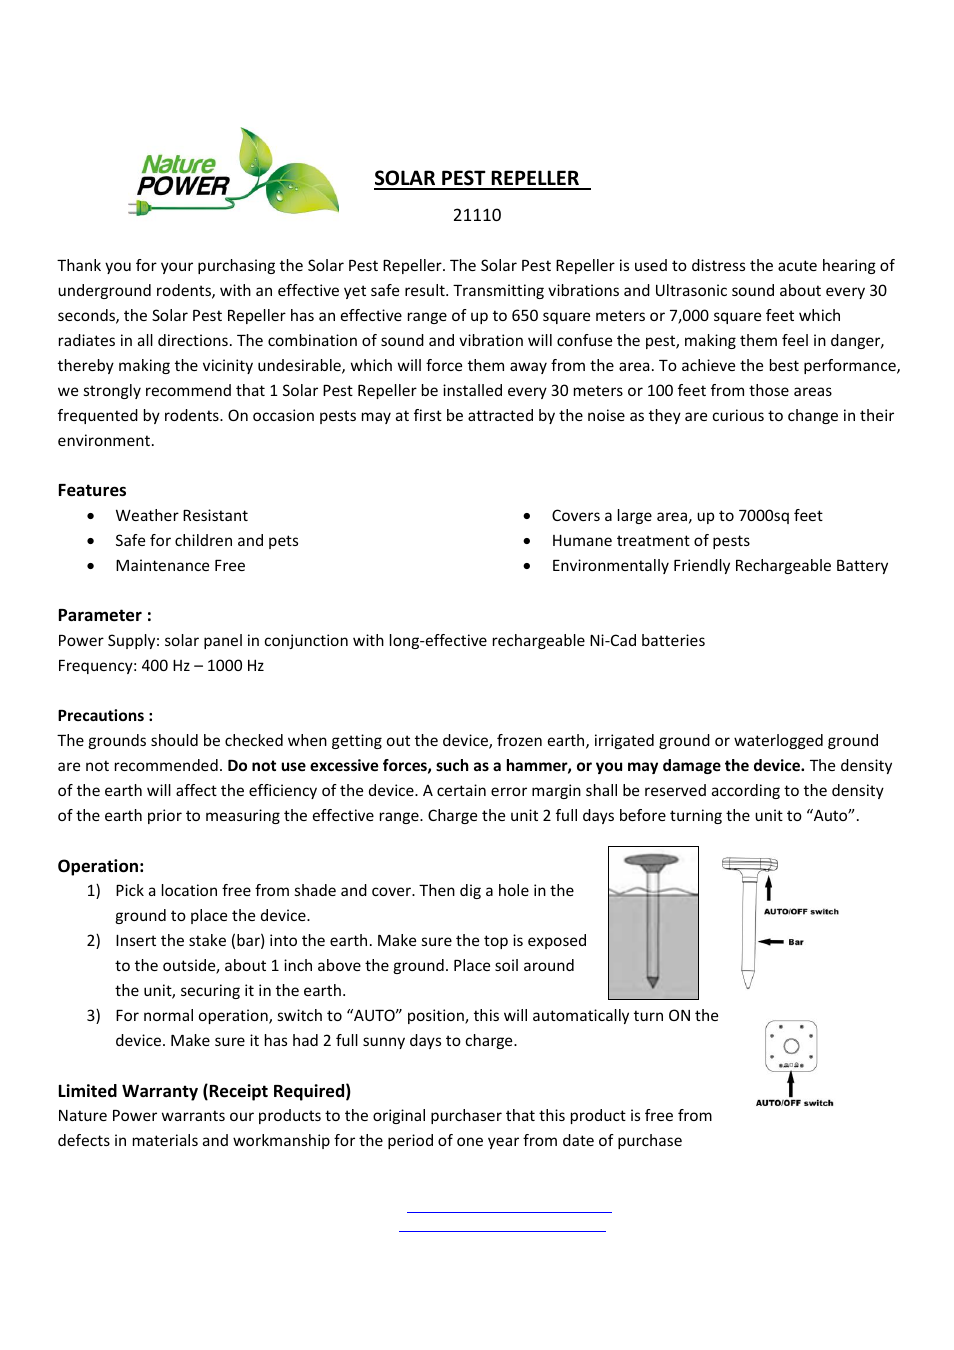 Nature Power SOLAR PEST REPELLER (21110
) User Manual | 1 page